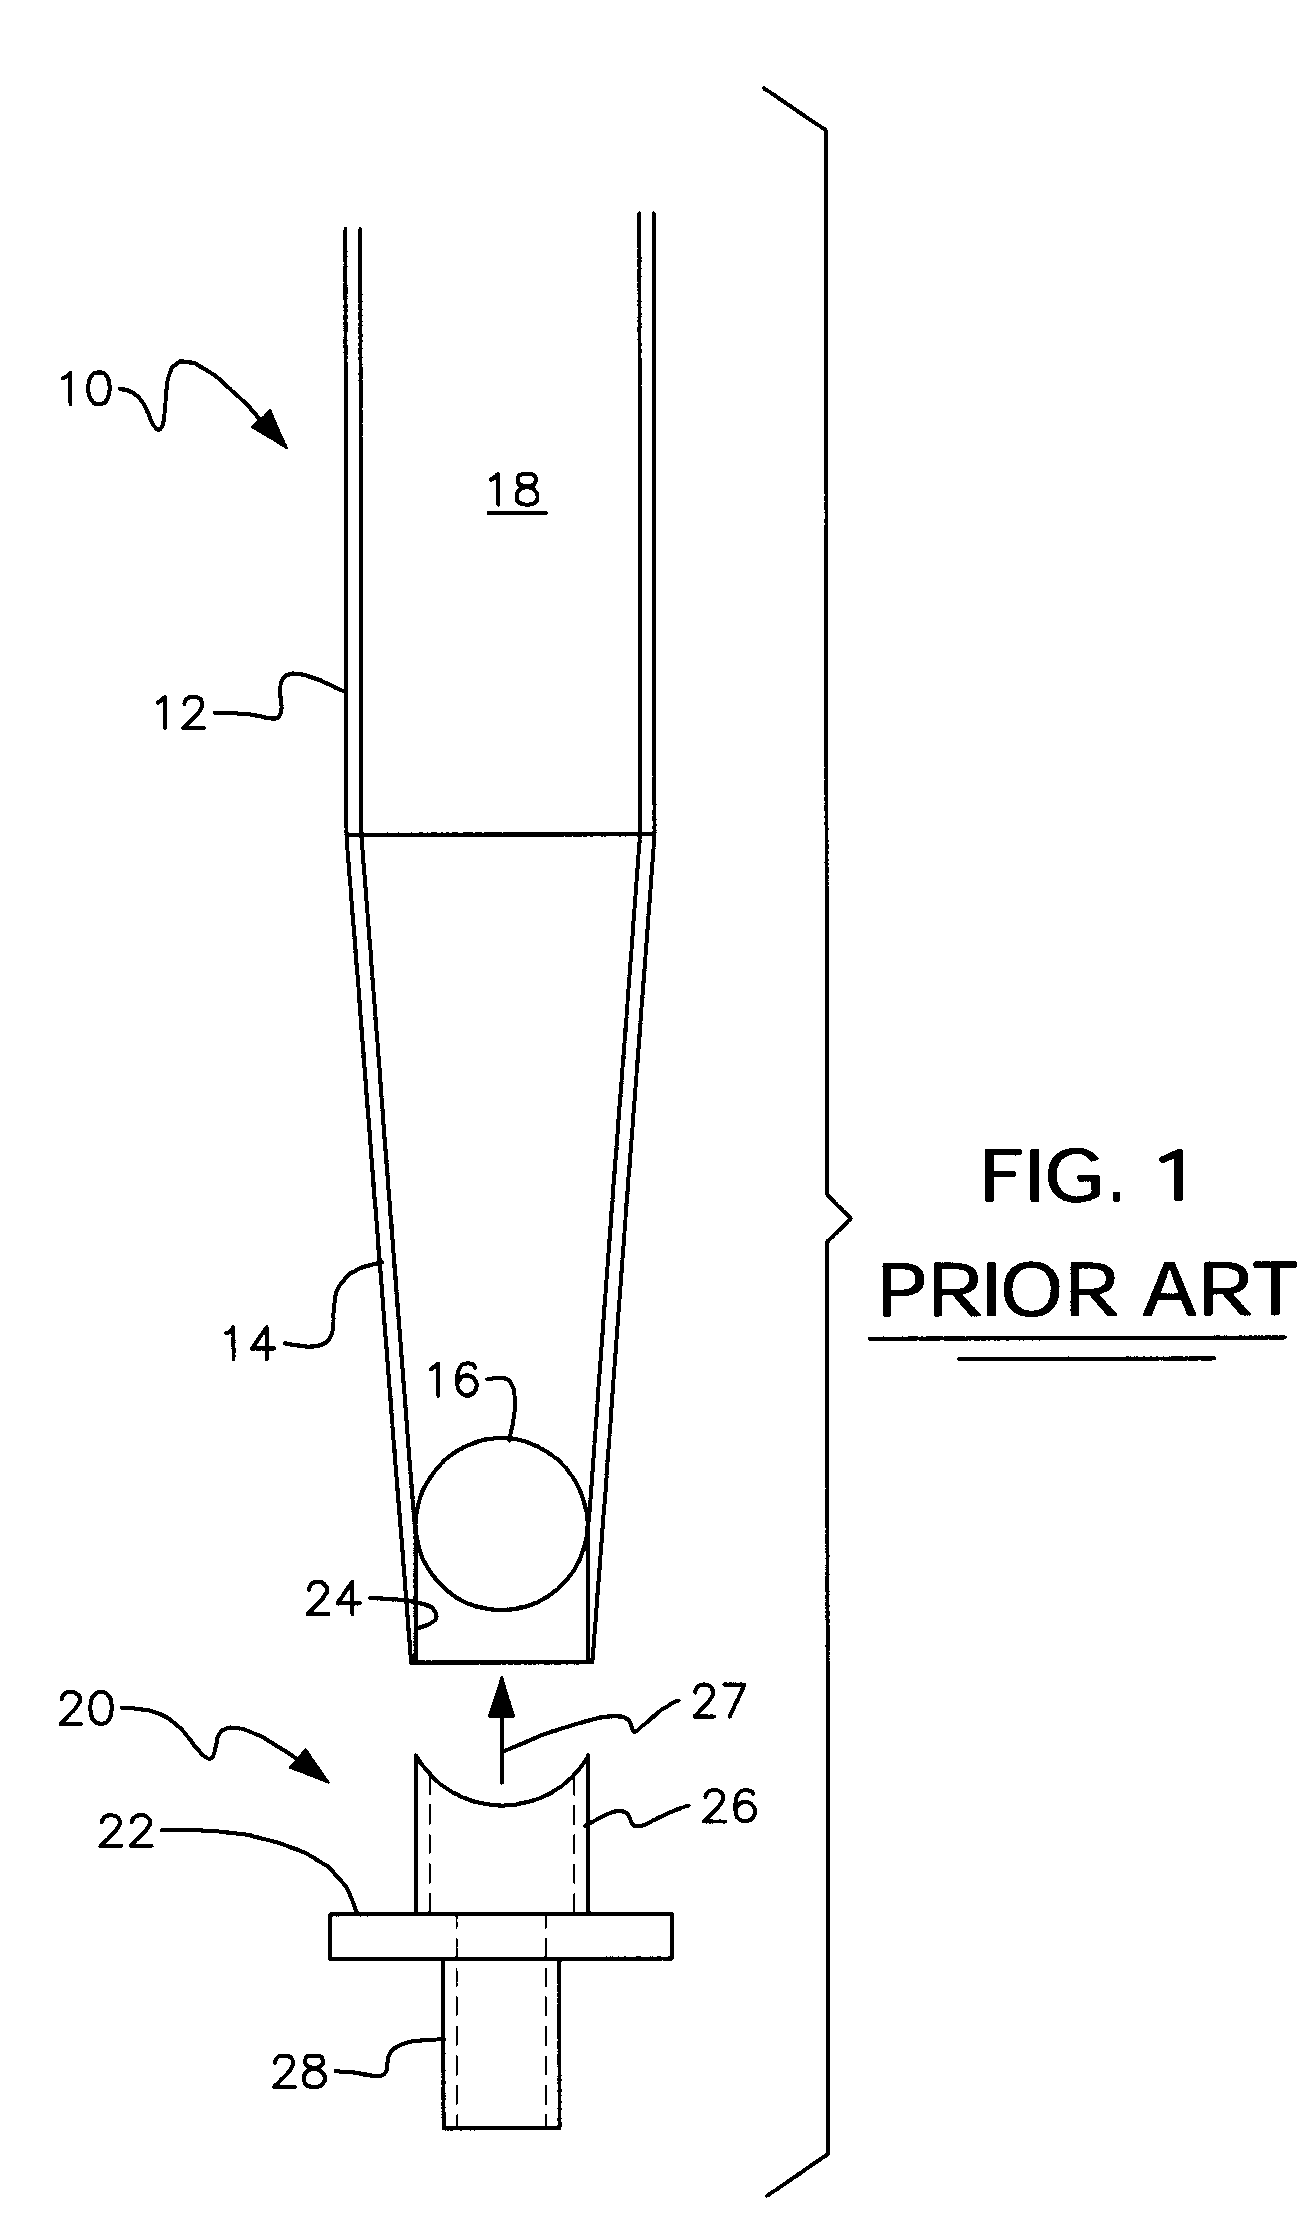 Bottom-emptying device for tapered bailer